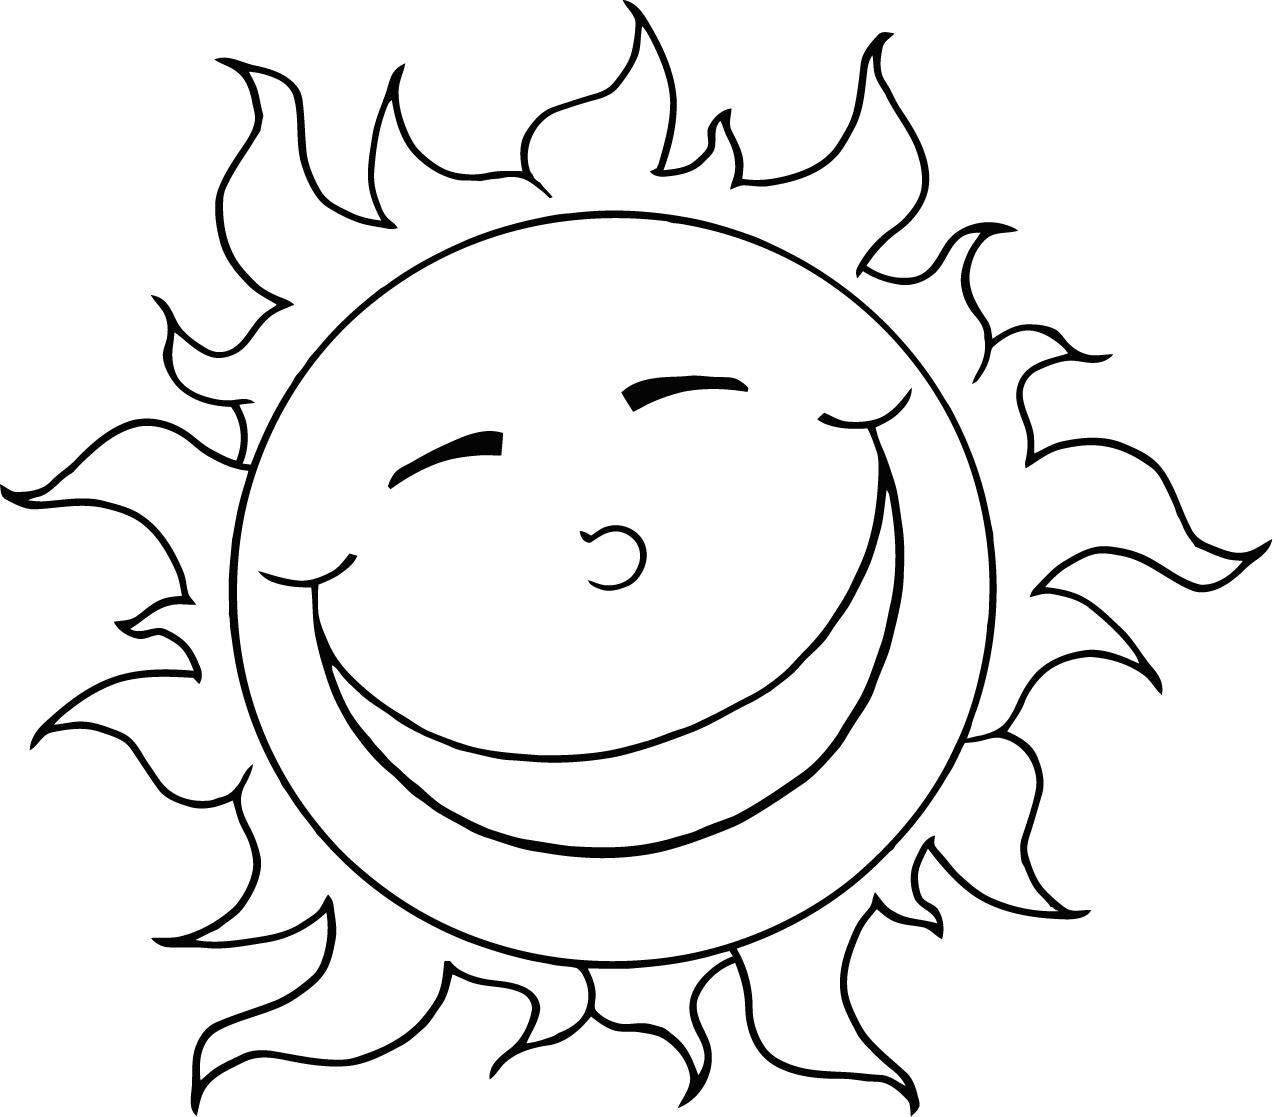 Download Free Printable Sun Coloring Pages for Kids